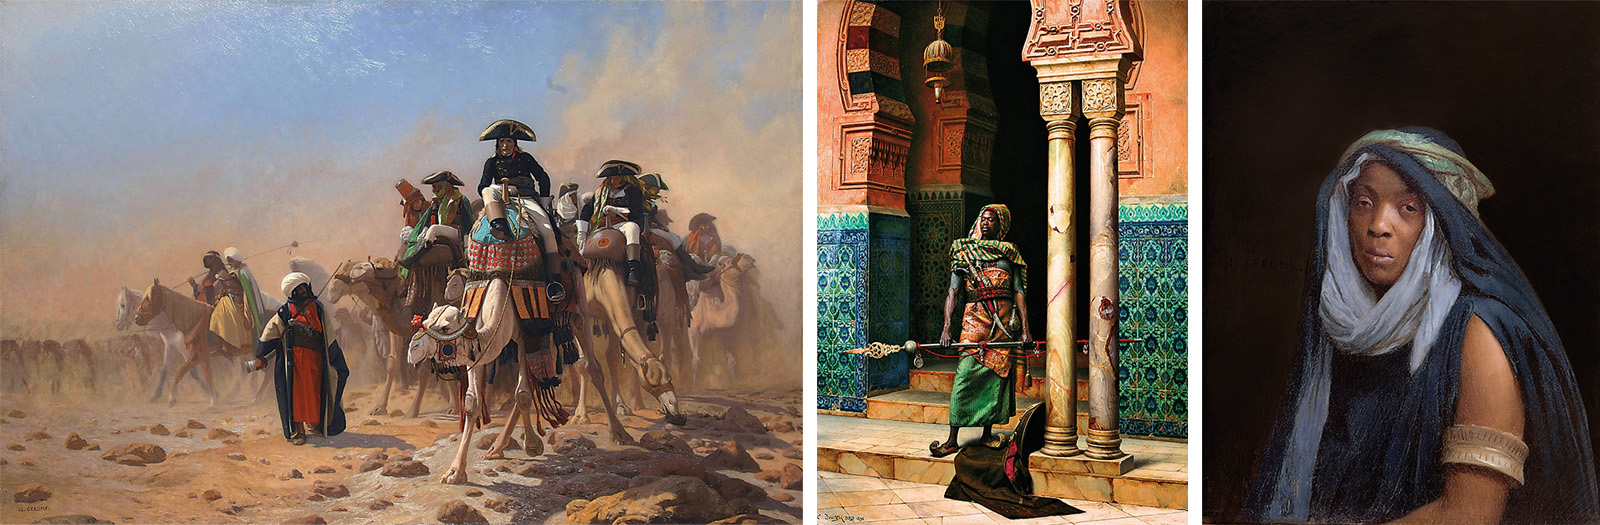 Left Gérôme’s “Napoleon and his General Staff in Egypt,” from 1867, is also local in its point of view: The French general is shown in weary, shambolic retreat from his colonial venture. “I always choose paintings each of which must tell a story,” says Gabr.  The Shafik Gabr Collection holds a number of works its founder describes as “interesting paintings in which people of color are honored.” These include Deutsch’s “The Nubian Guard,” from 1896, center, and Gérôme’s “simple, unadorned but deeply sympathetic” portrait “The Black Maidservant,” from 1877, right.